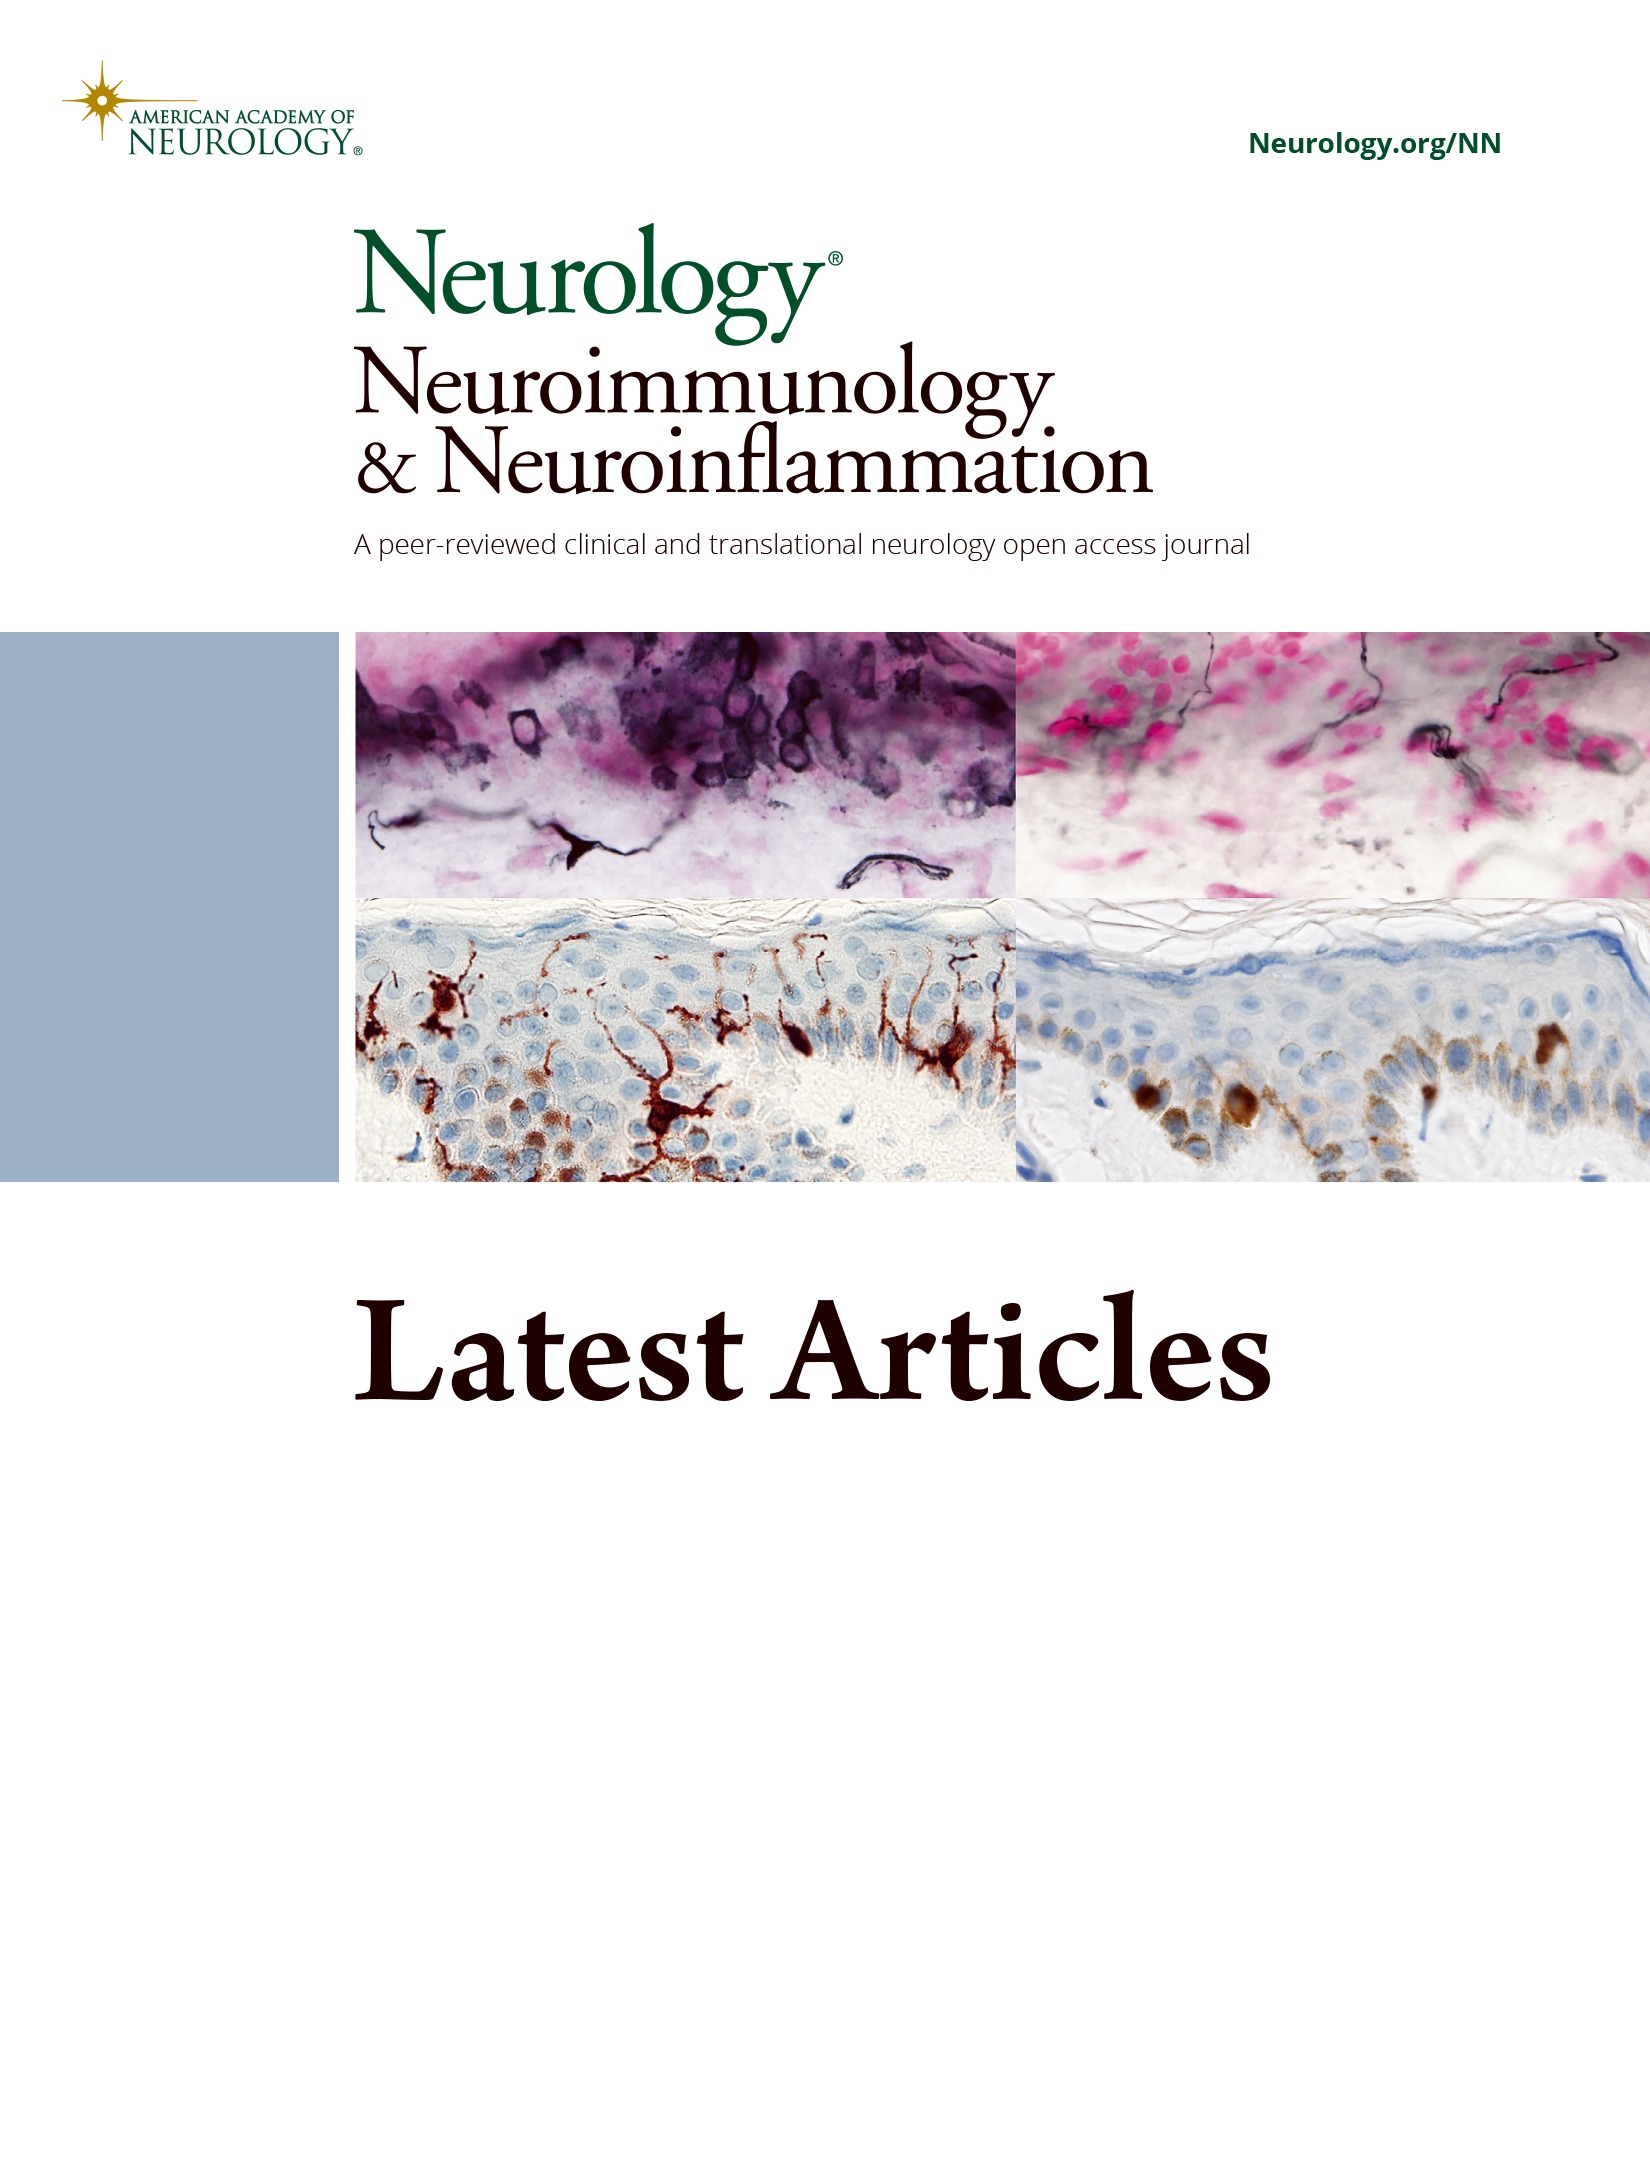 Ocrelizumab Impairs the Phenotype and Function of Memory CD8+ T Cells: A 1-Year Longitudinal Study in Patients With Multiple Sclerosis